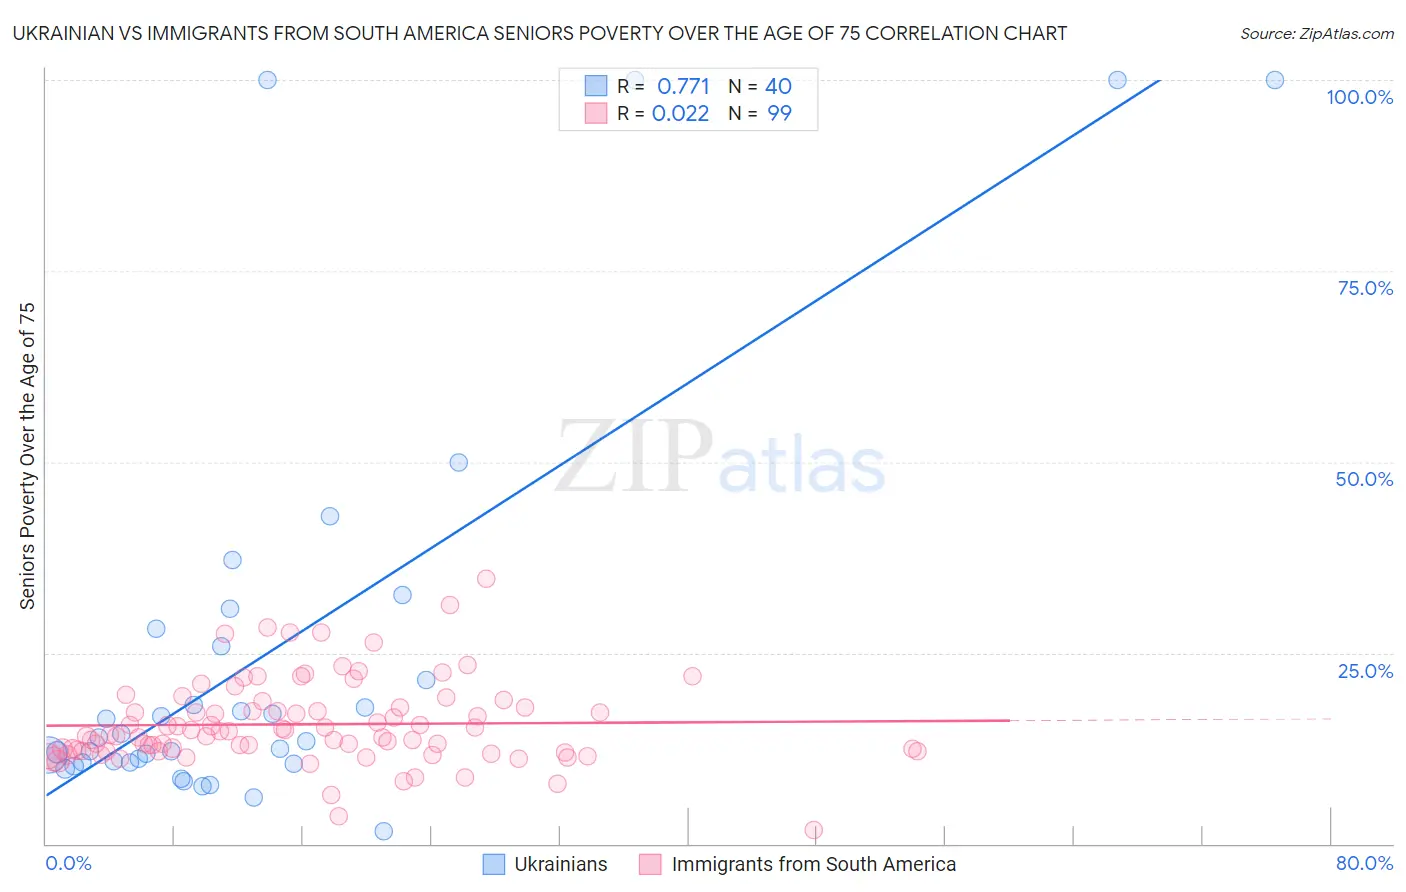 Ukrainian vs Immigrants from South America Seniors Poverty Over the Age of 75